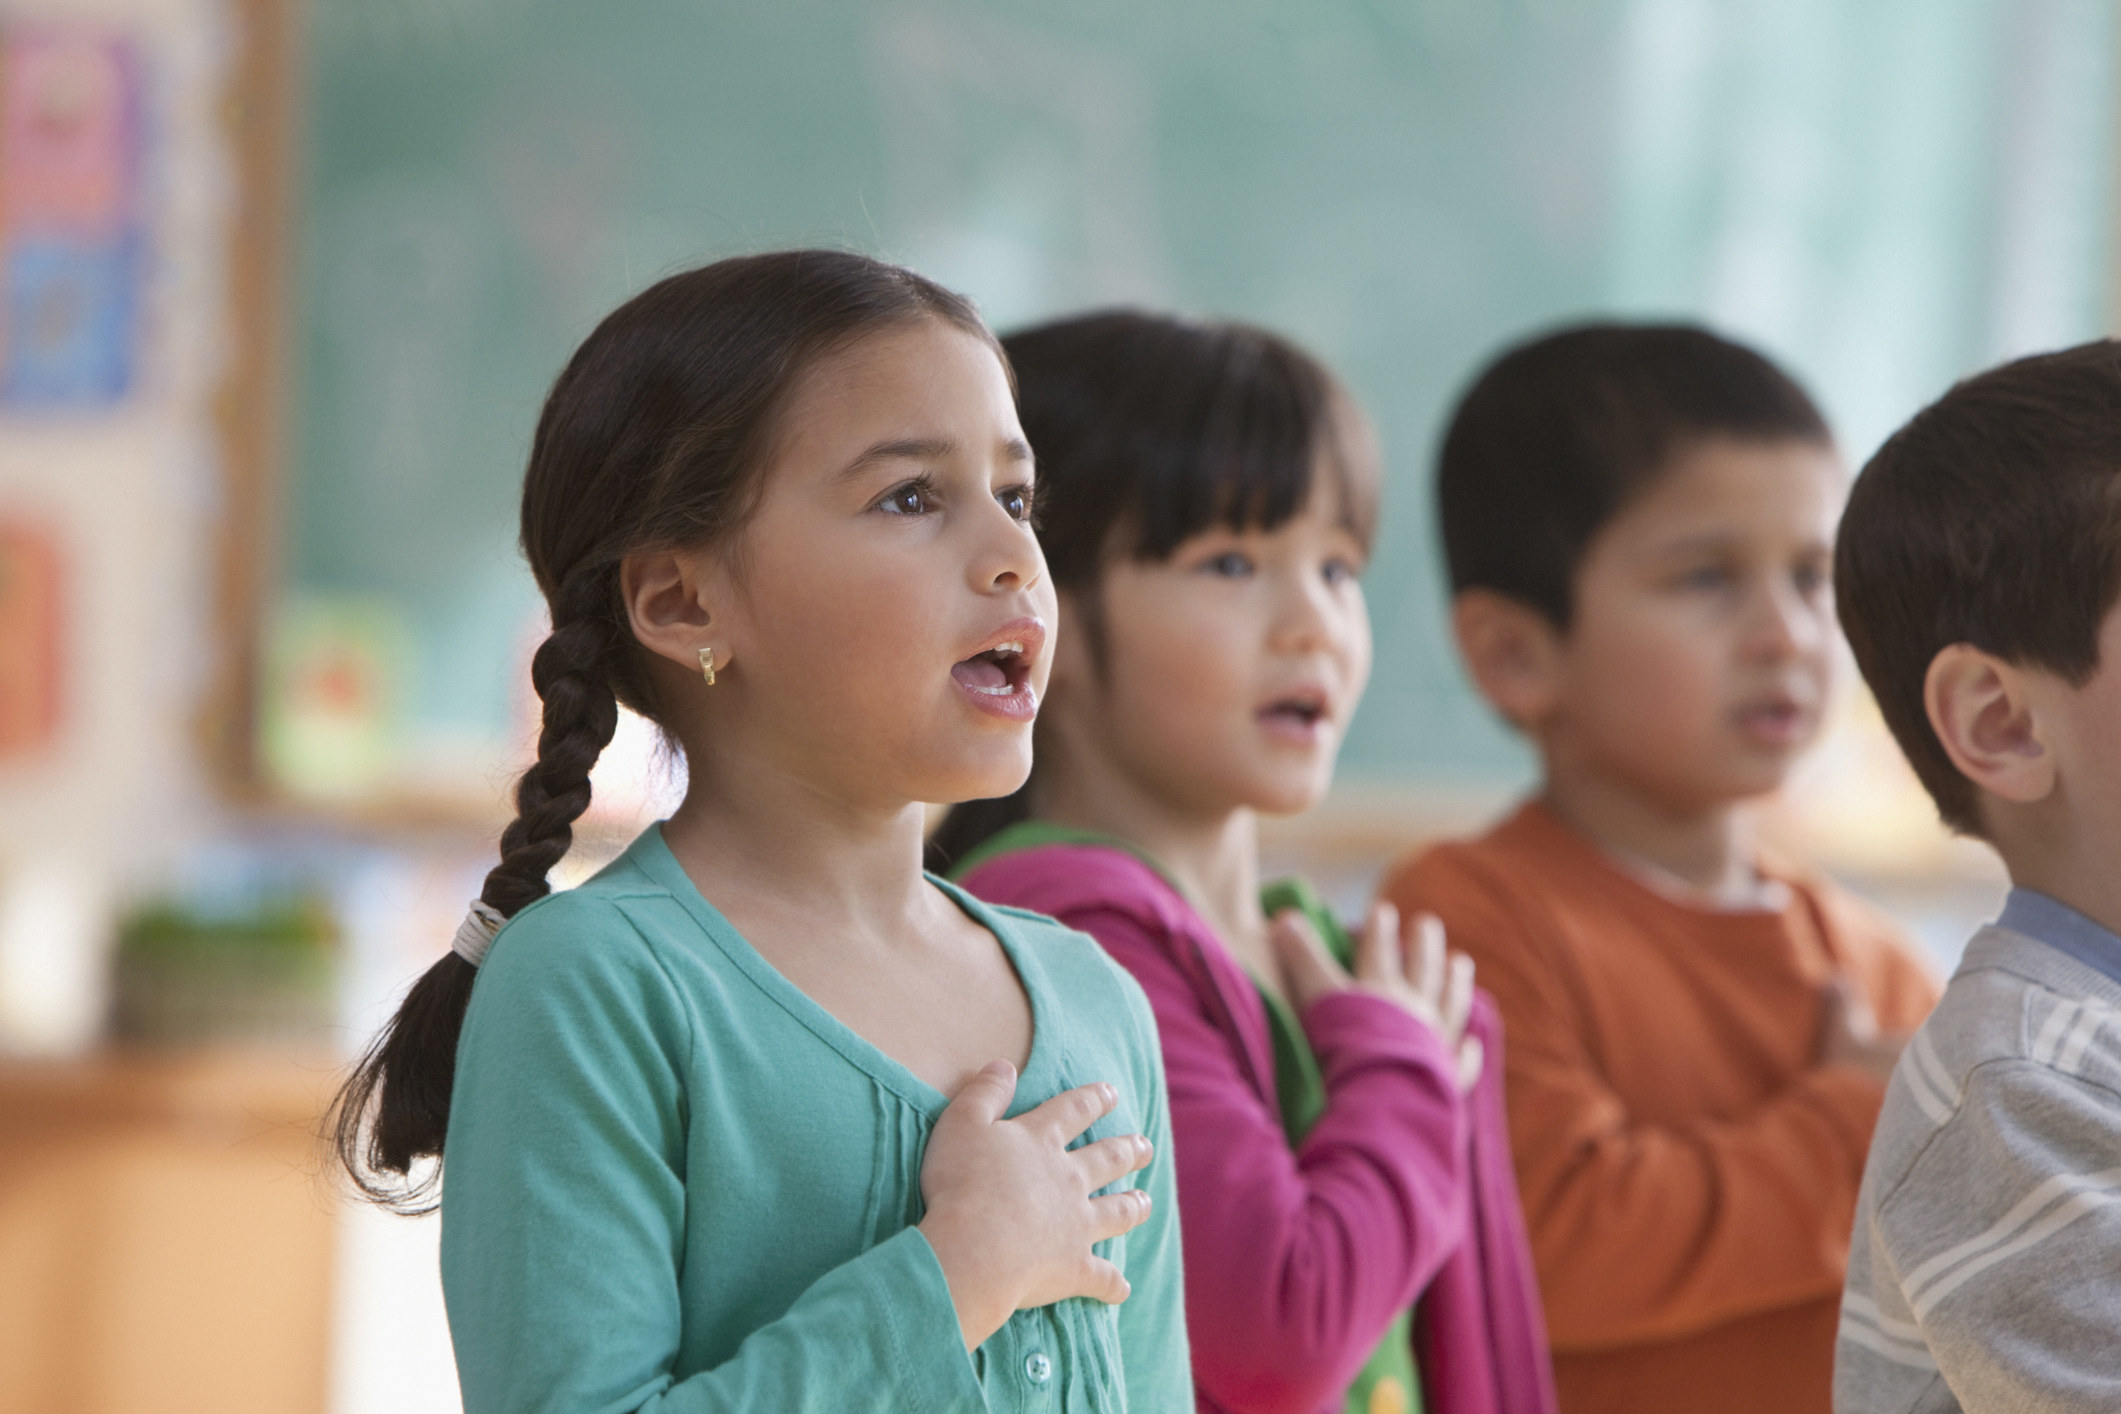 A group of children in a classroom reciting the pledge with their hands over their hearts